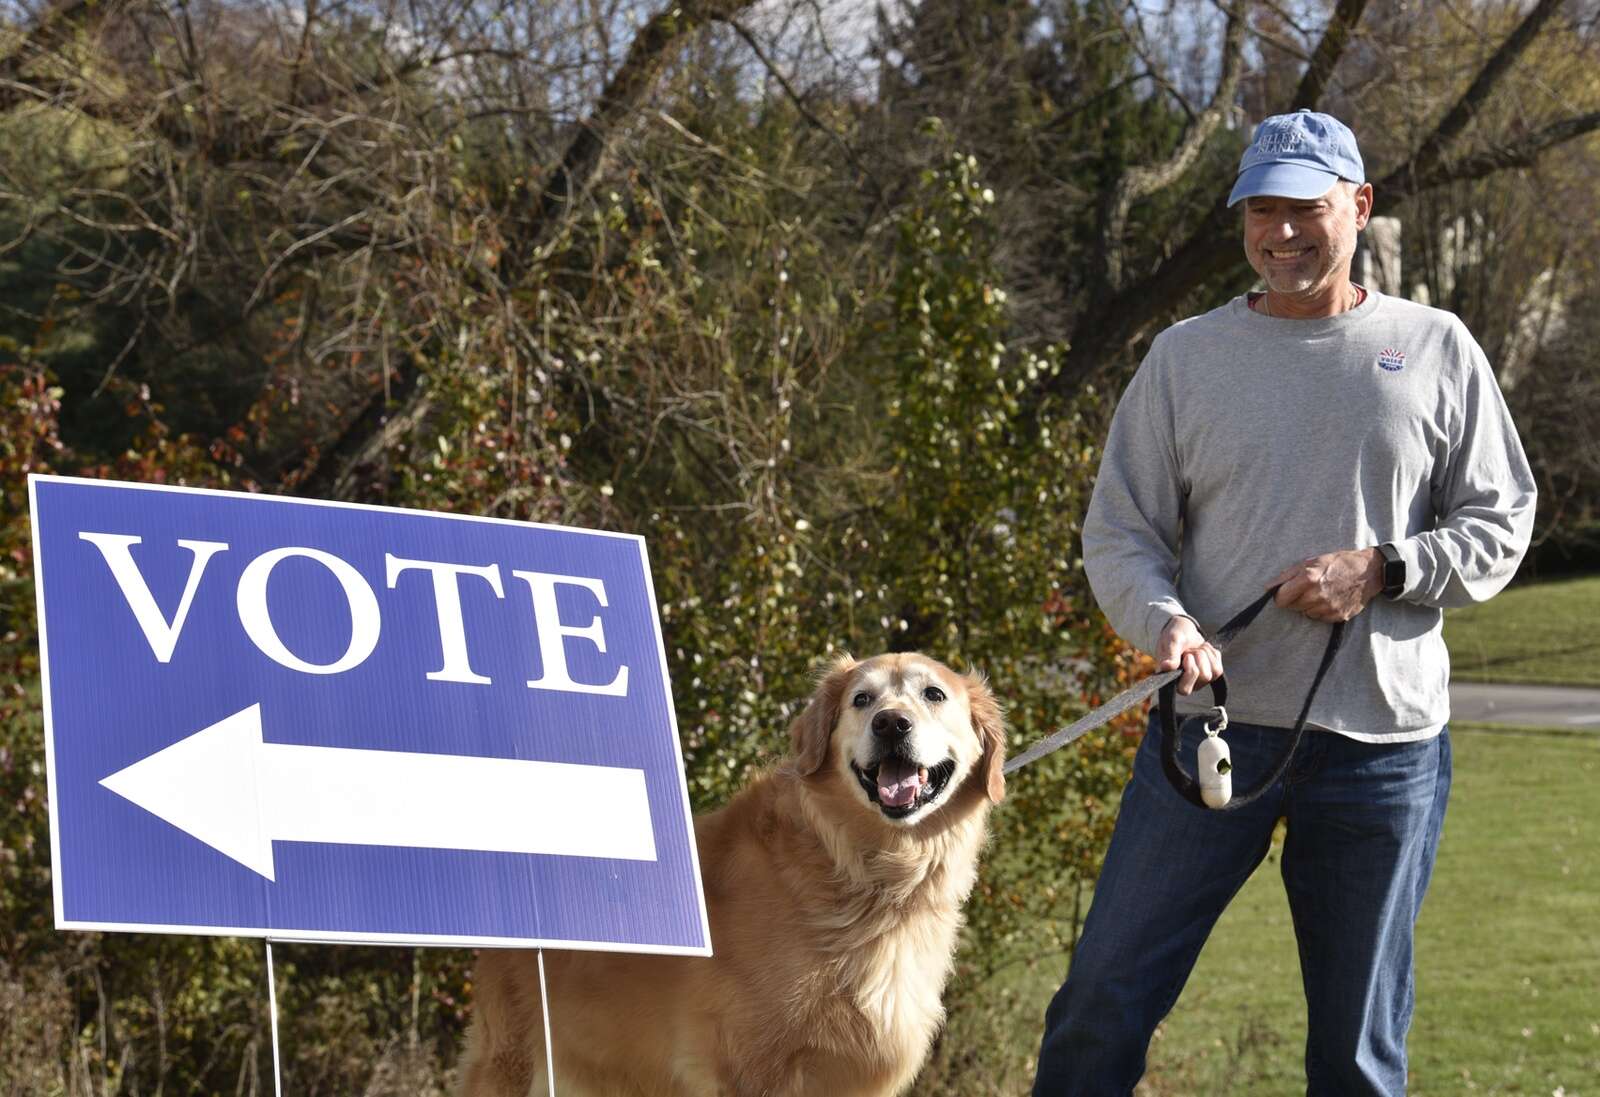 Chuck Seibel and his dog prepare to enter the polling station